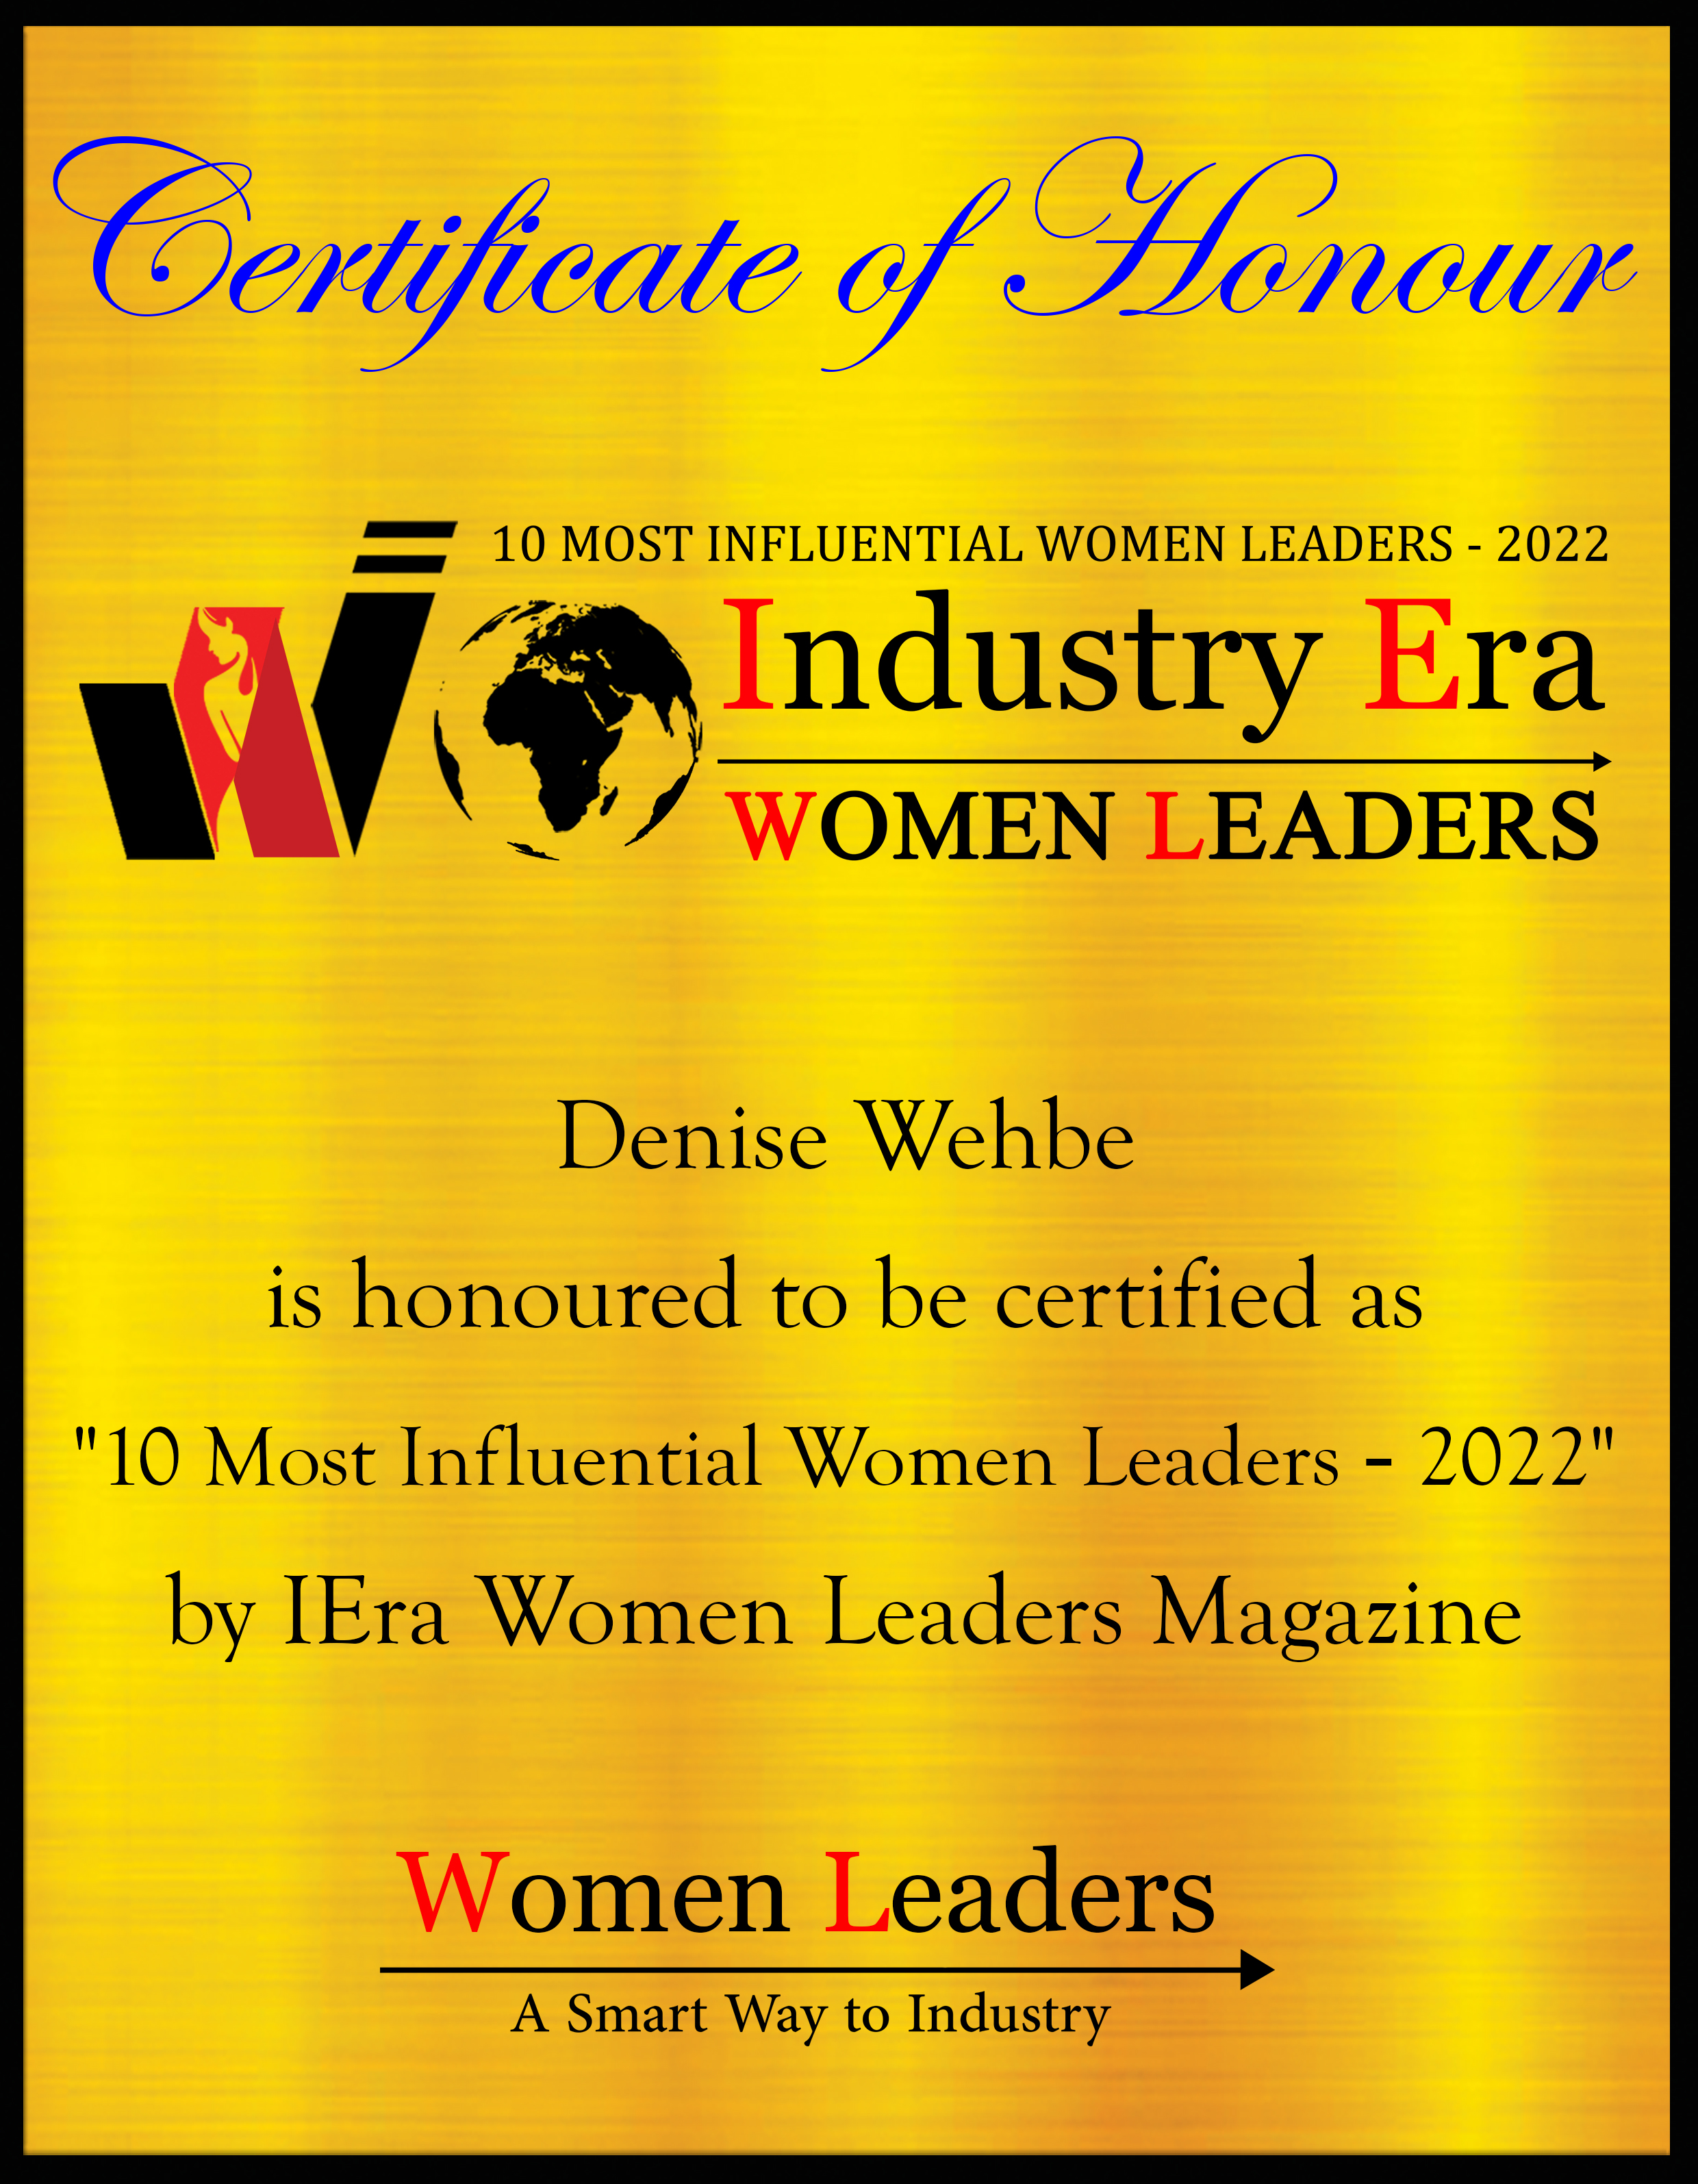 Denise Wehbe, Chief Operating Officer of A-Tech Australia, 10 Most Influential Women Leaders of 2022